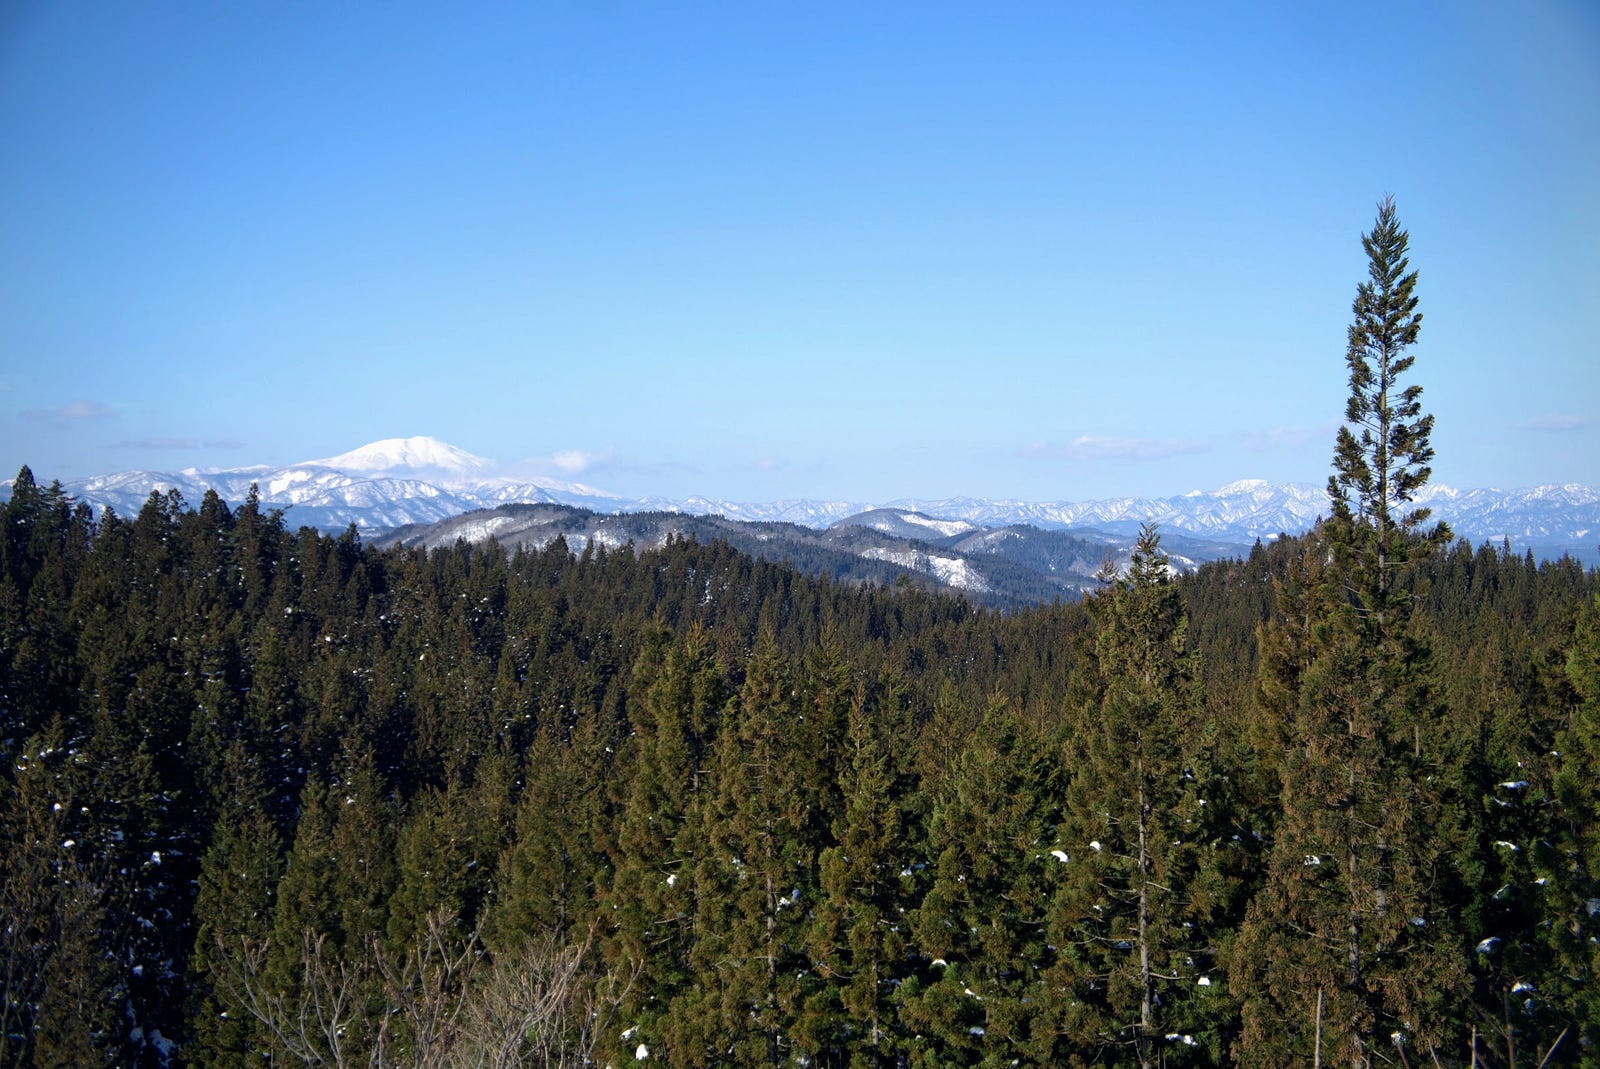 Mt. Chokai seen in the distance with the tress of Mt. Yonetaihei in the foreground